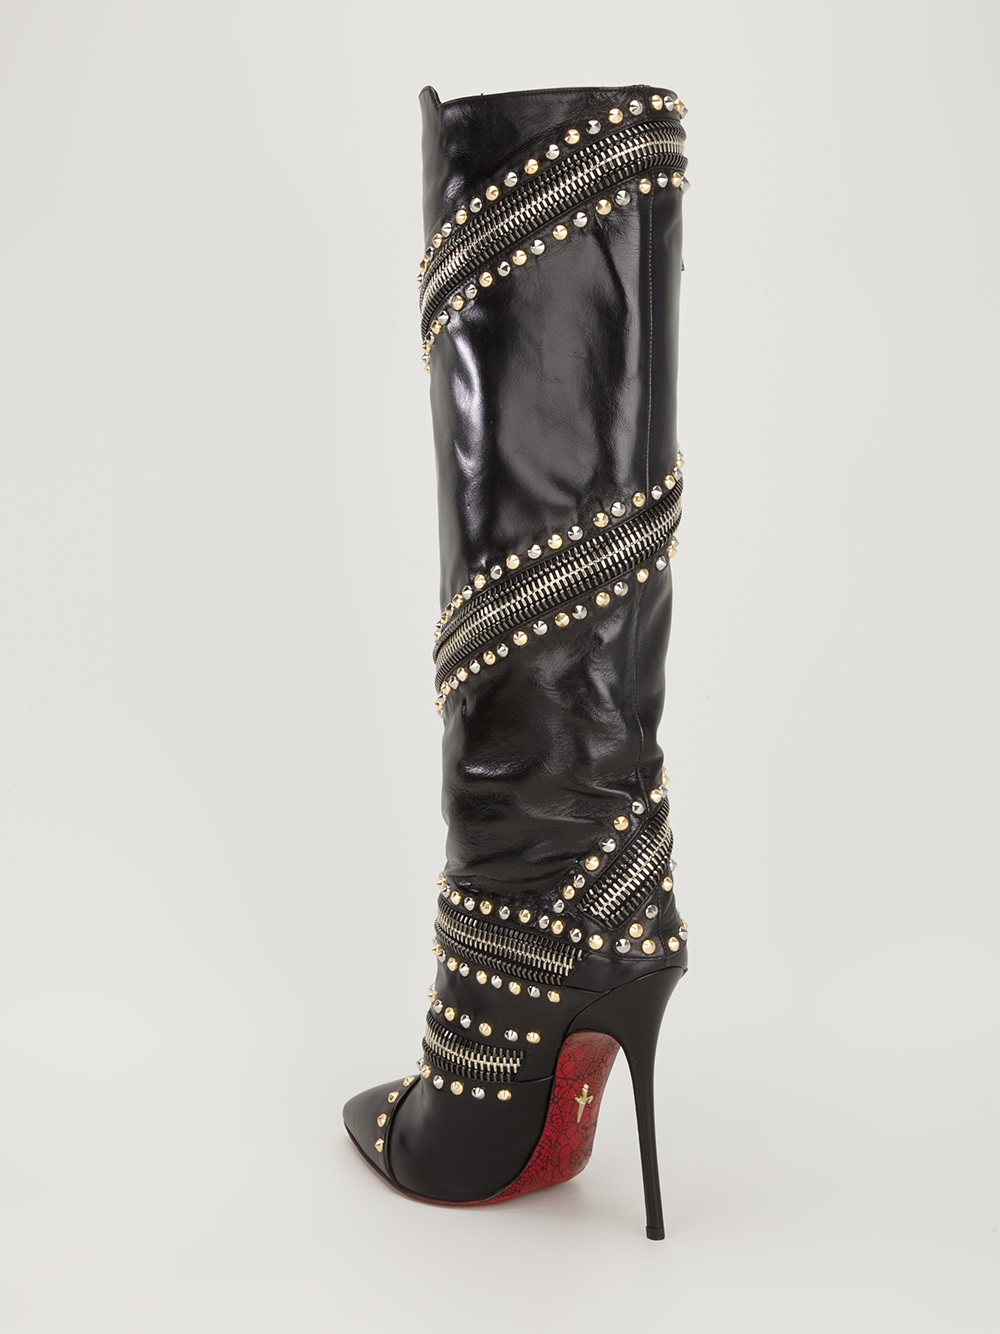 Cesare Paciotti Knee High Studded Boot in Black - Lyst